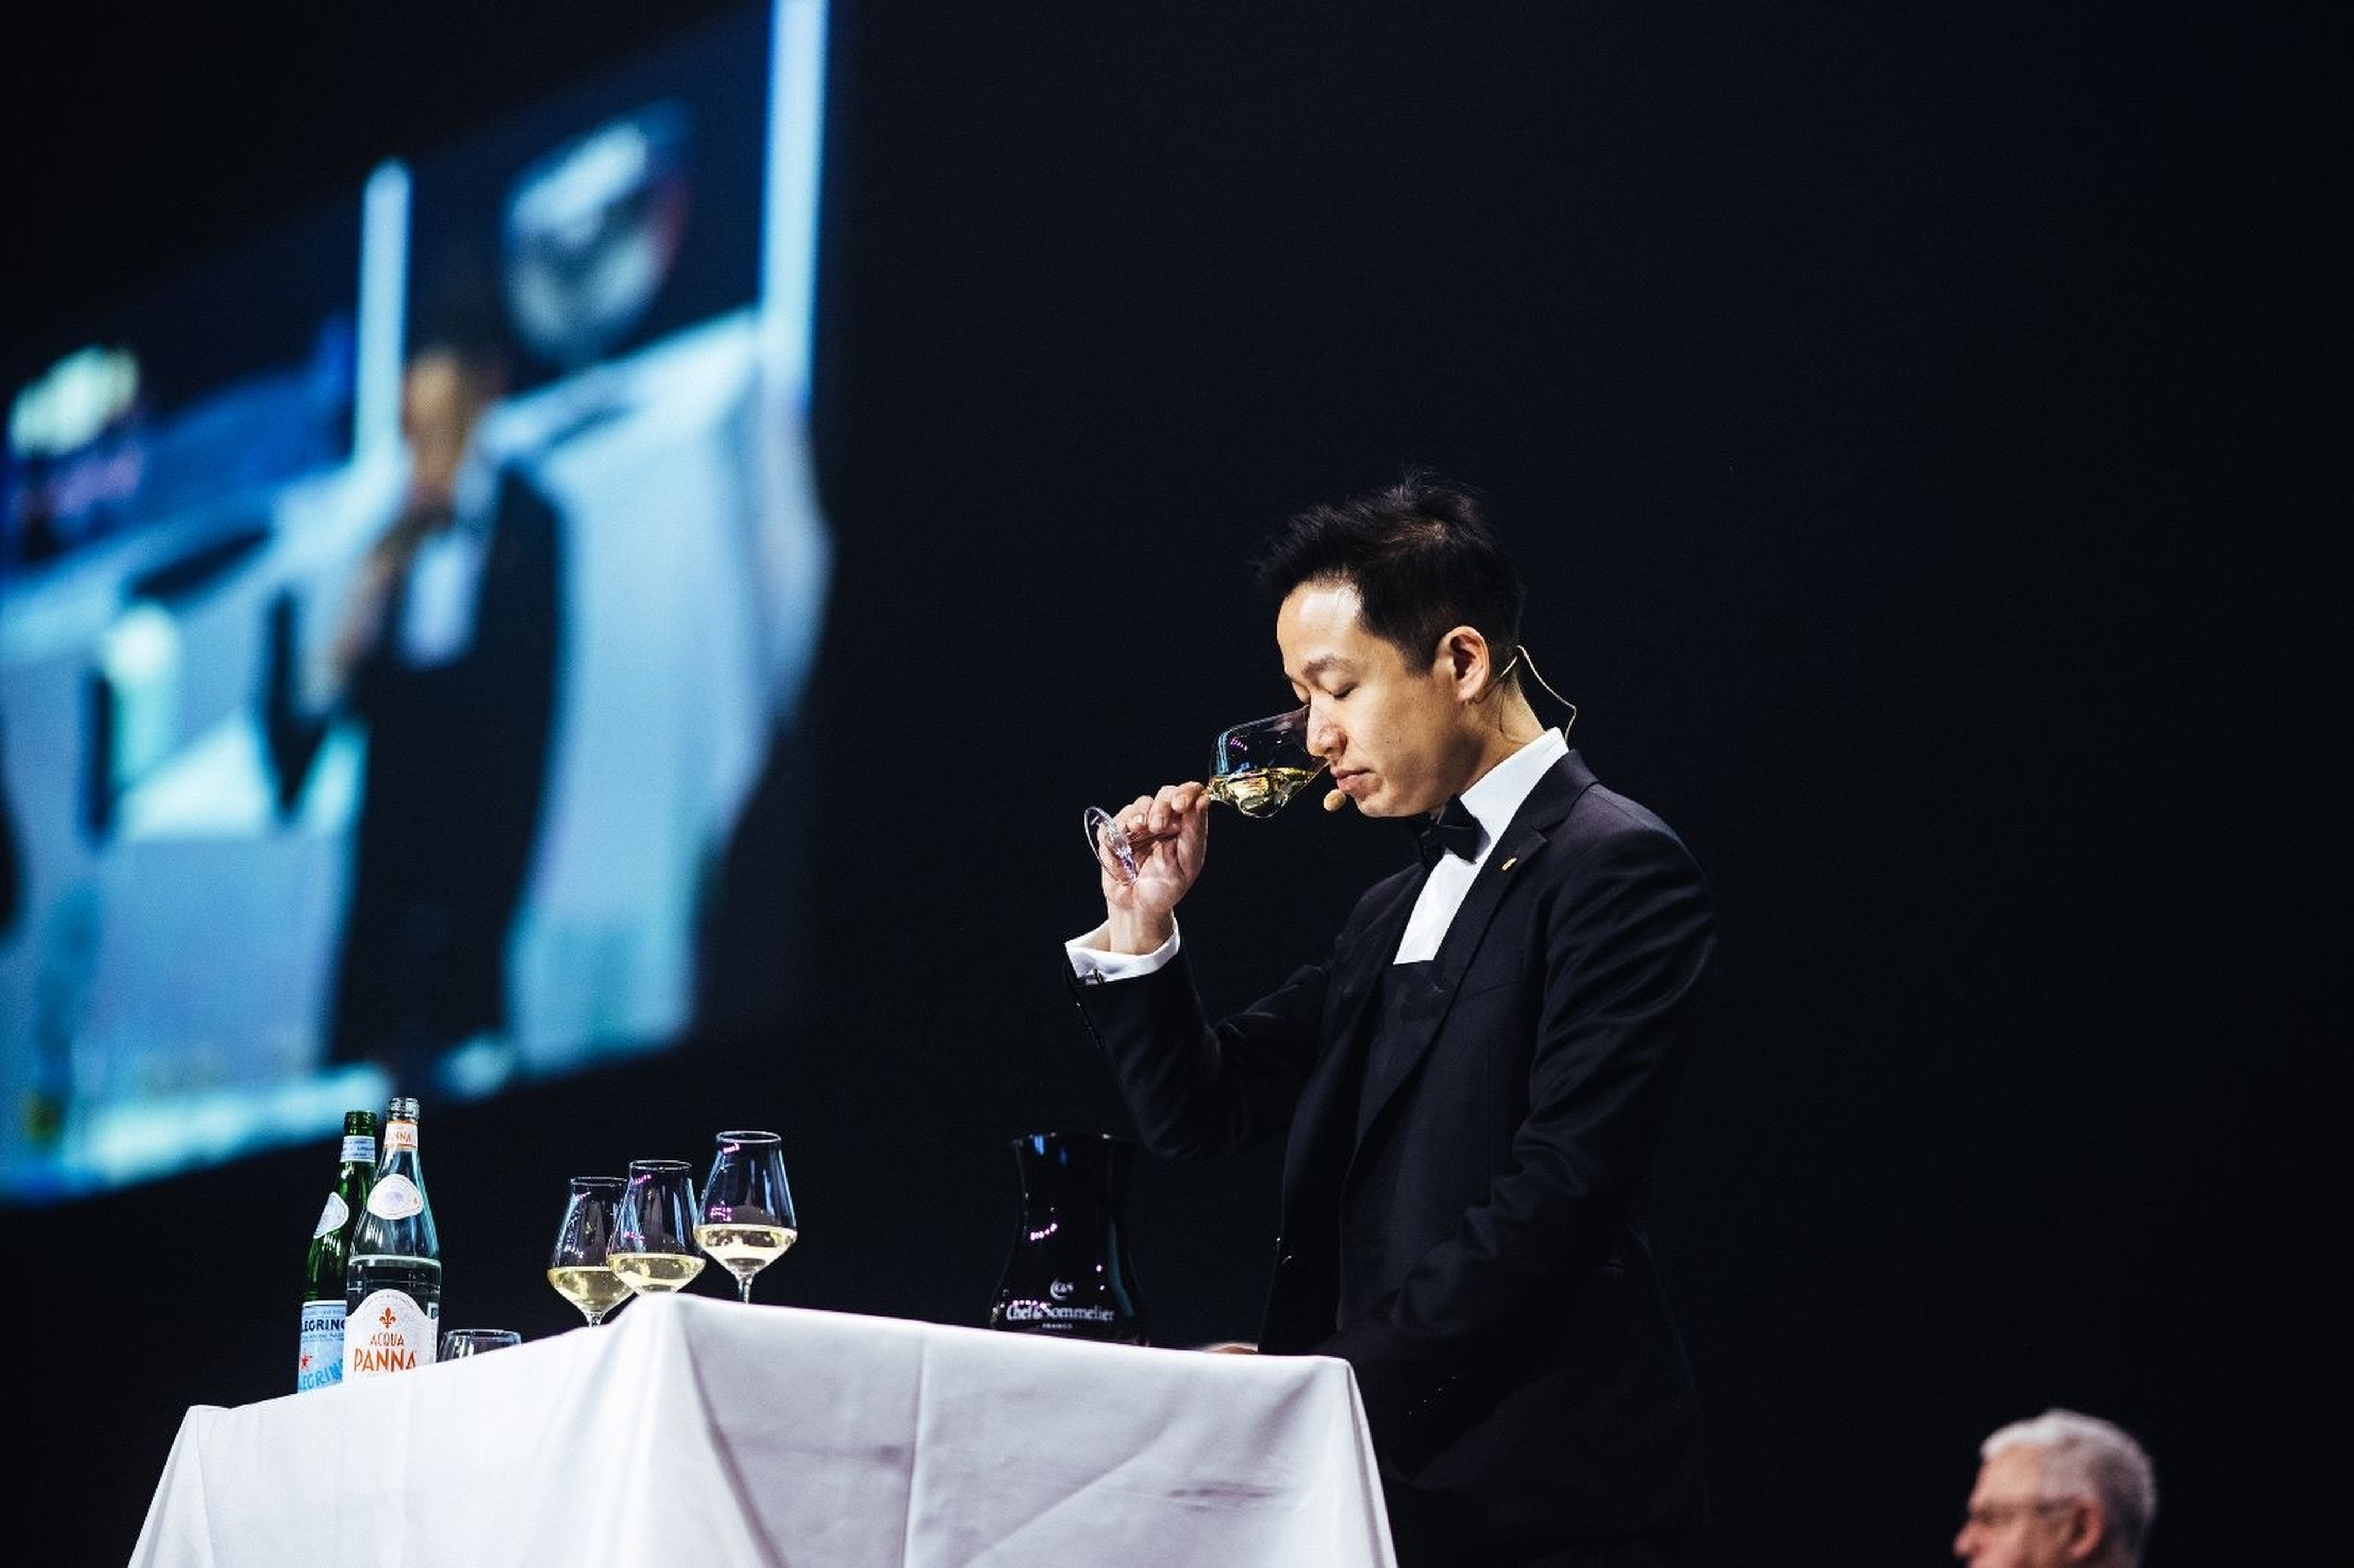 Reeze Choi Kam-fung at the ASI Best Sommelier of the World 2023 competition in Paris. The Hongkonger talks about his “unreal” journey from convenience store worker to third best sommelier in the world. Photo: Association de la Sommellerie Internationale/HrvProd